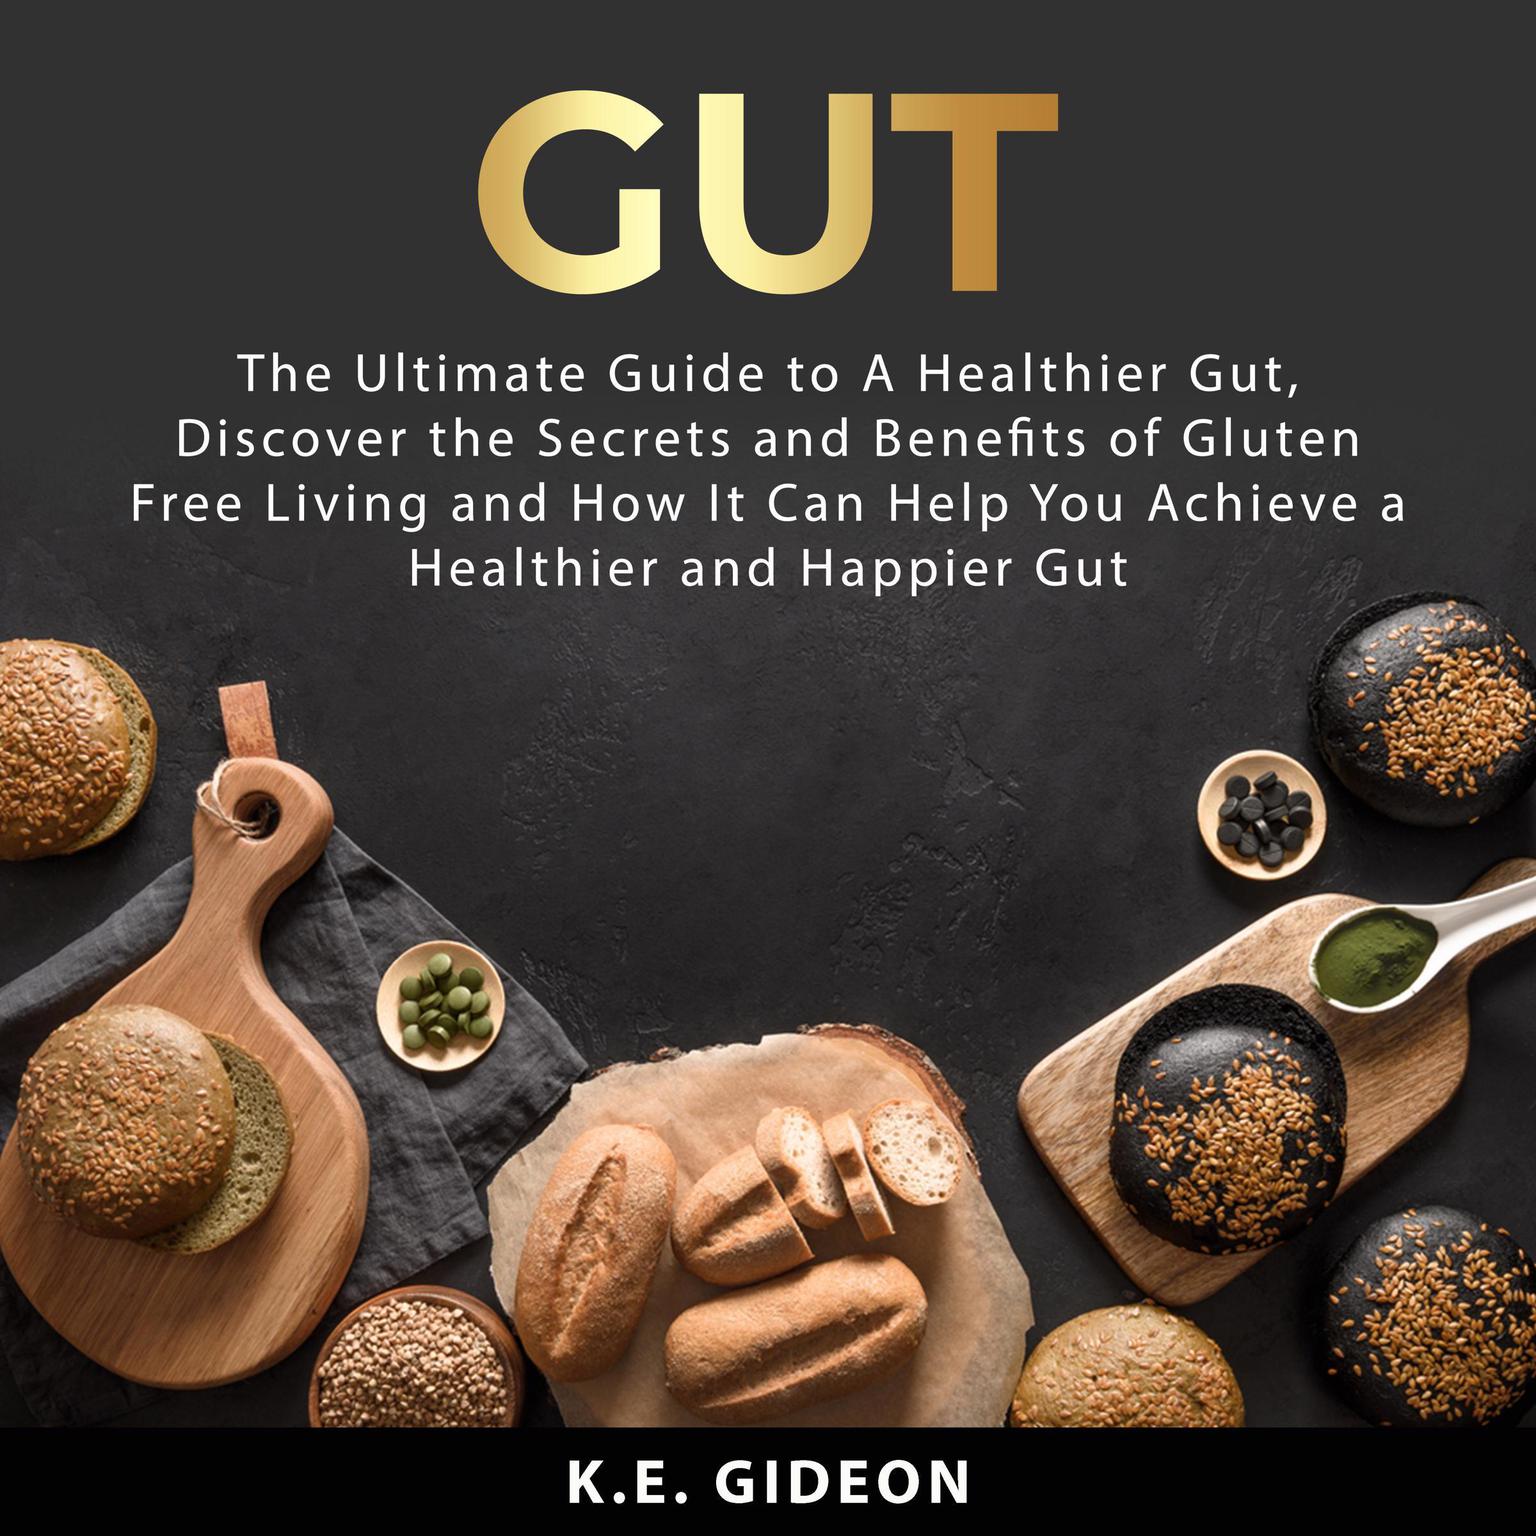 Gut: The Ultimate Guide to A Healthier Gut, Discover the Secrets and Benefits of Gluten Free Living And How It Can Help You Achieve a Healthier and Happier Gut Audiobook, by K.E. Gideon